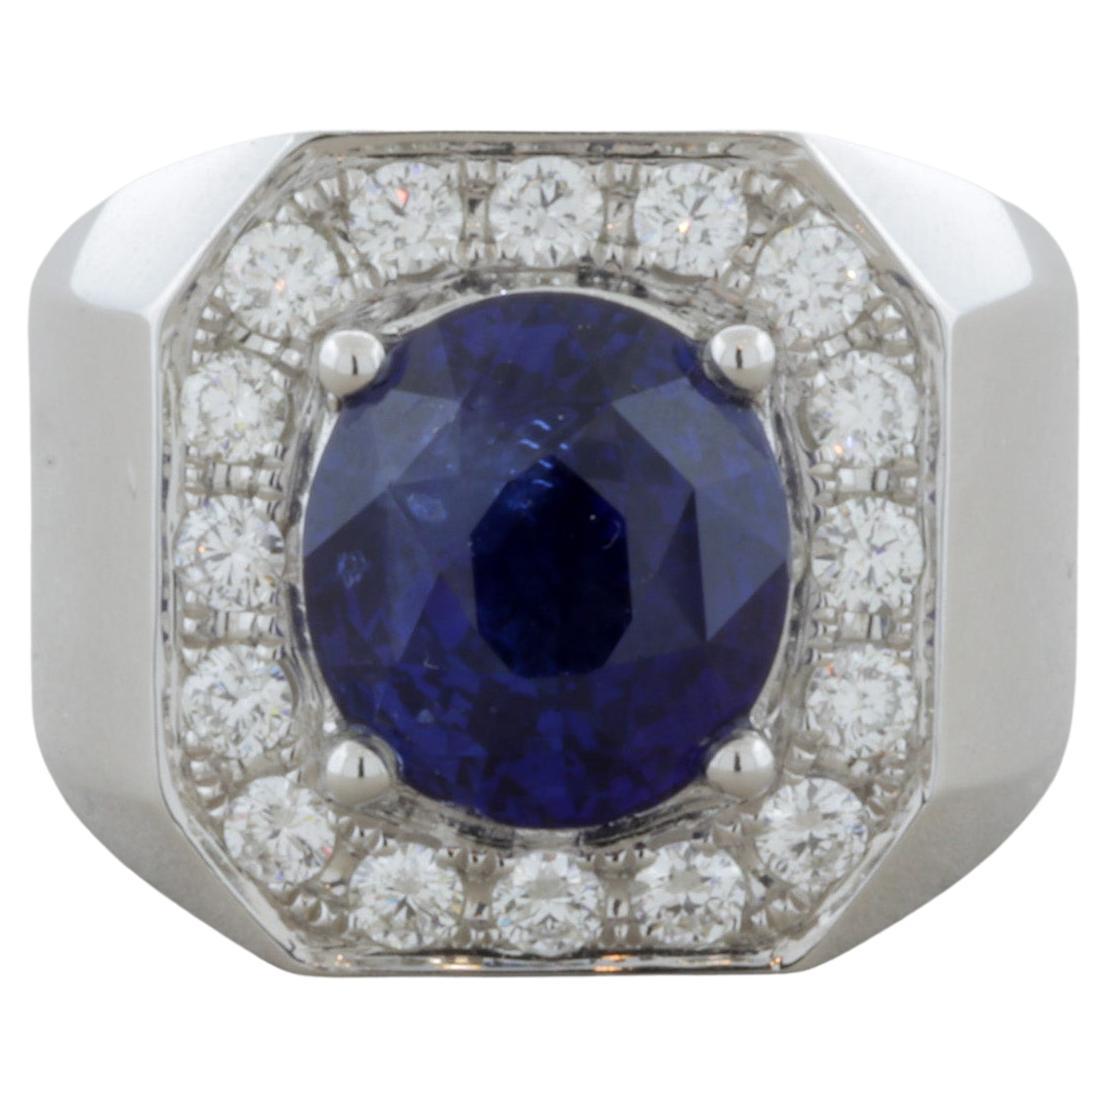 5.80 Carat Royal Blue Sapphire Diamond Gold Ring, Unisex 'Certified' For Sale